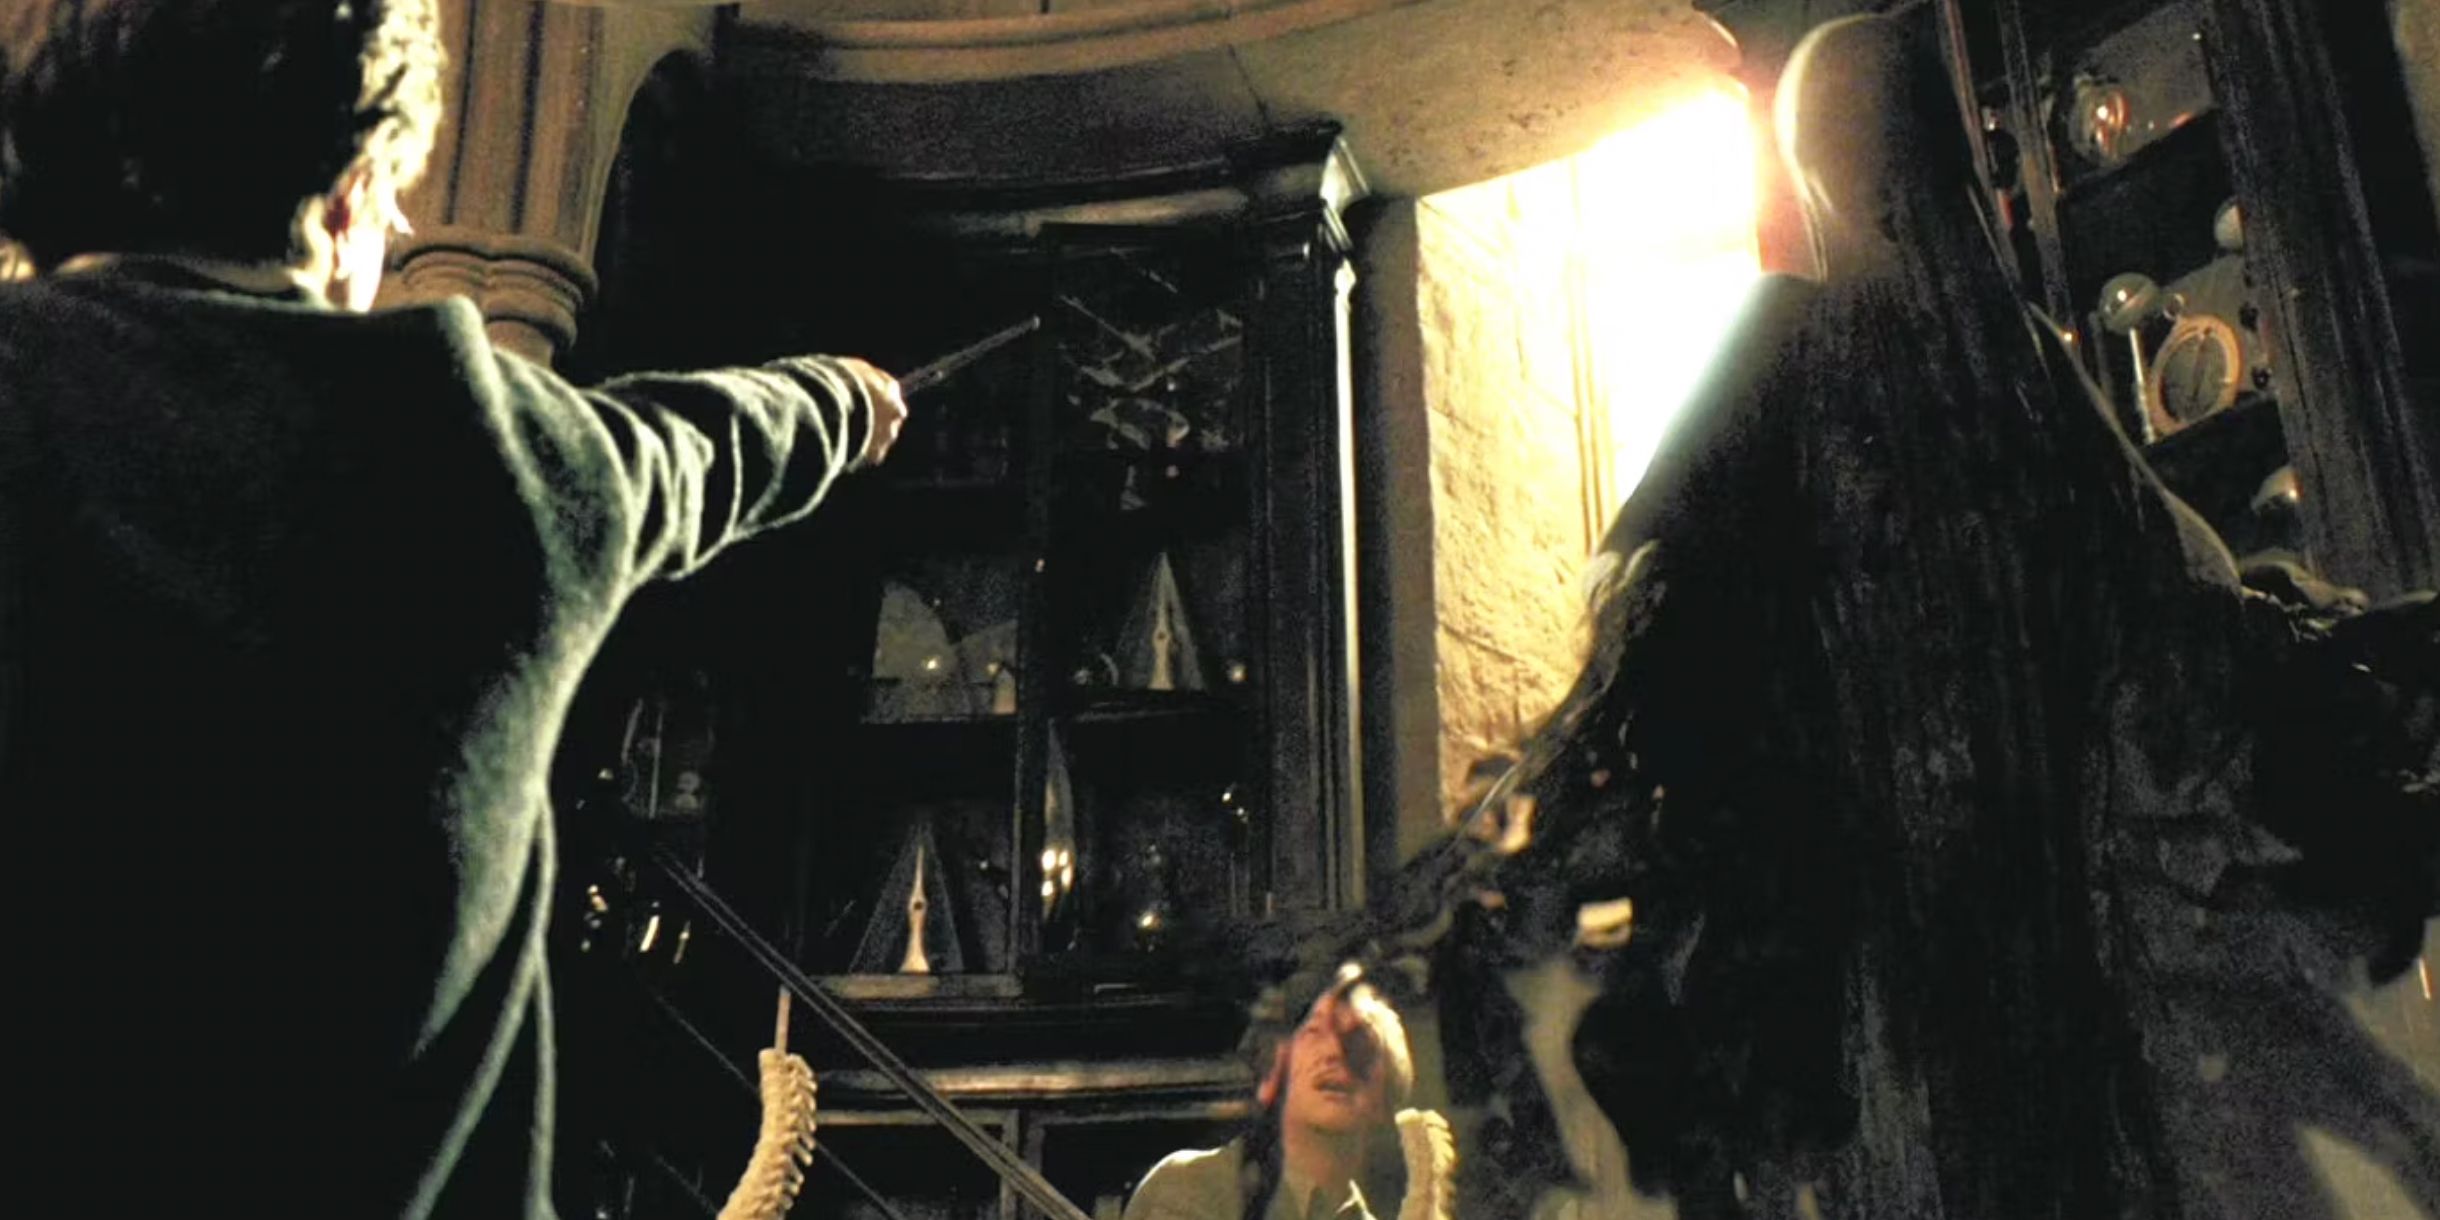 Harry aims his wand at a boggwart in the shape of dementor in Harry Potter and the Prisoner of Azkaban